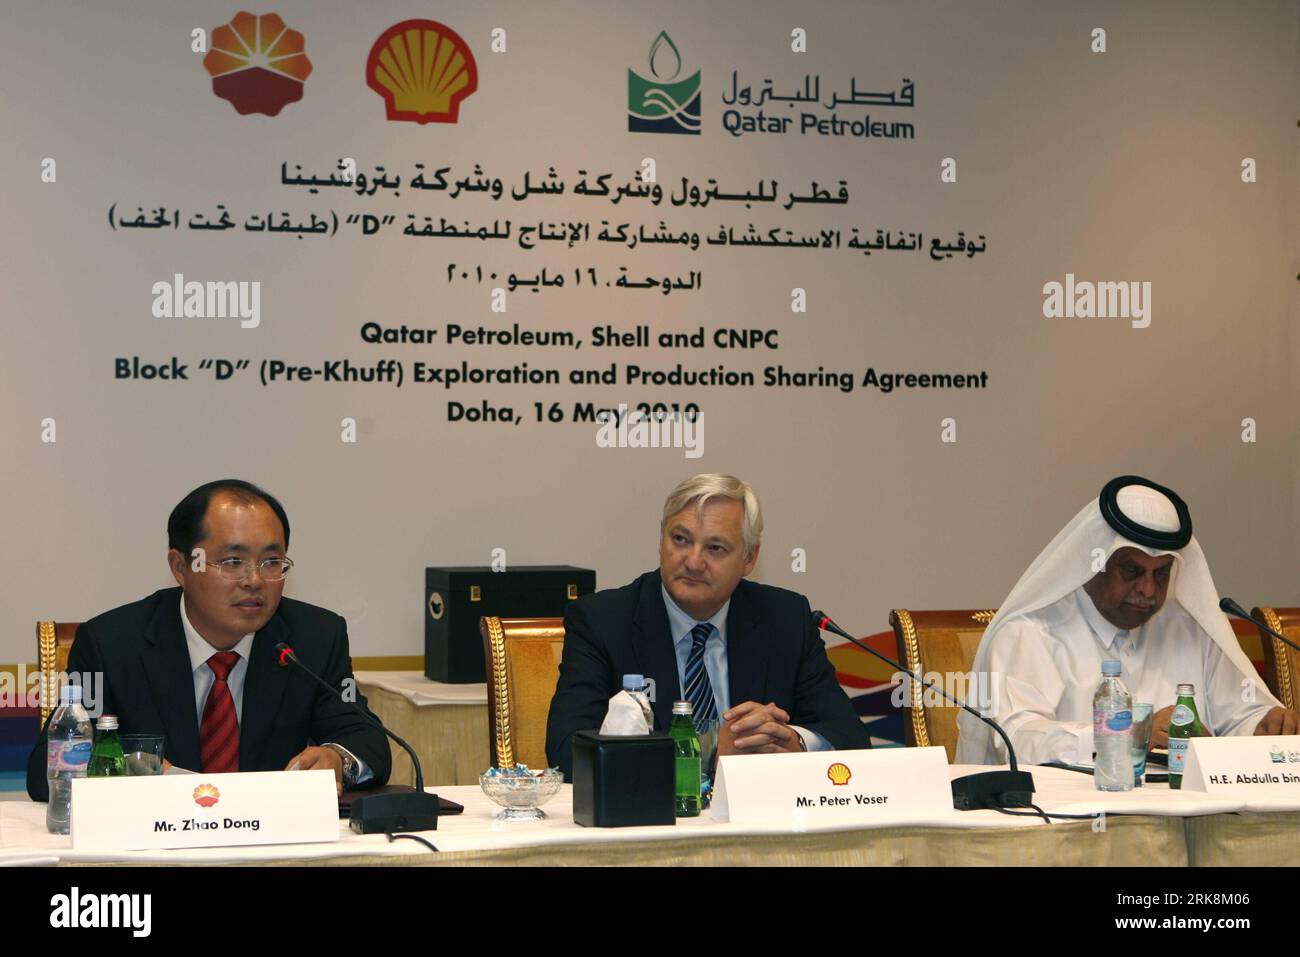 Bildnummer: 54052729  Datum: 16.05.2010  Copyright: imago/Xinhua (100517) -- QATAR, May 17, 2010 (Xinhua) -- Zhao Dong (L), CFO of PetroChina International Investment, along with Peter Voser (C), CEO of Royal Dutch Shell Plc, and Abdulla Bin Hamad Al-Attiyah (R), deputy premier and minister of Energy and Industry of Qatar, address the press during the signing of The Exploration and Production Sharing Agreement (EPSA) in Doha, May 16, 2010. The EPSA is signed Sunday between Qatar Petroleum (QP) and joint partners Shell and China National Petroleum Corporation (CNPC) for the exploration of natur Stock Photo